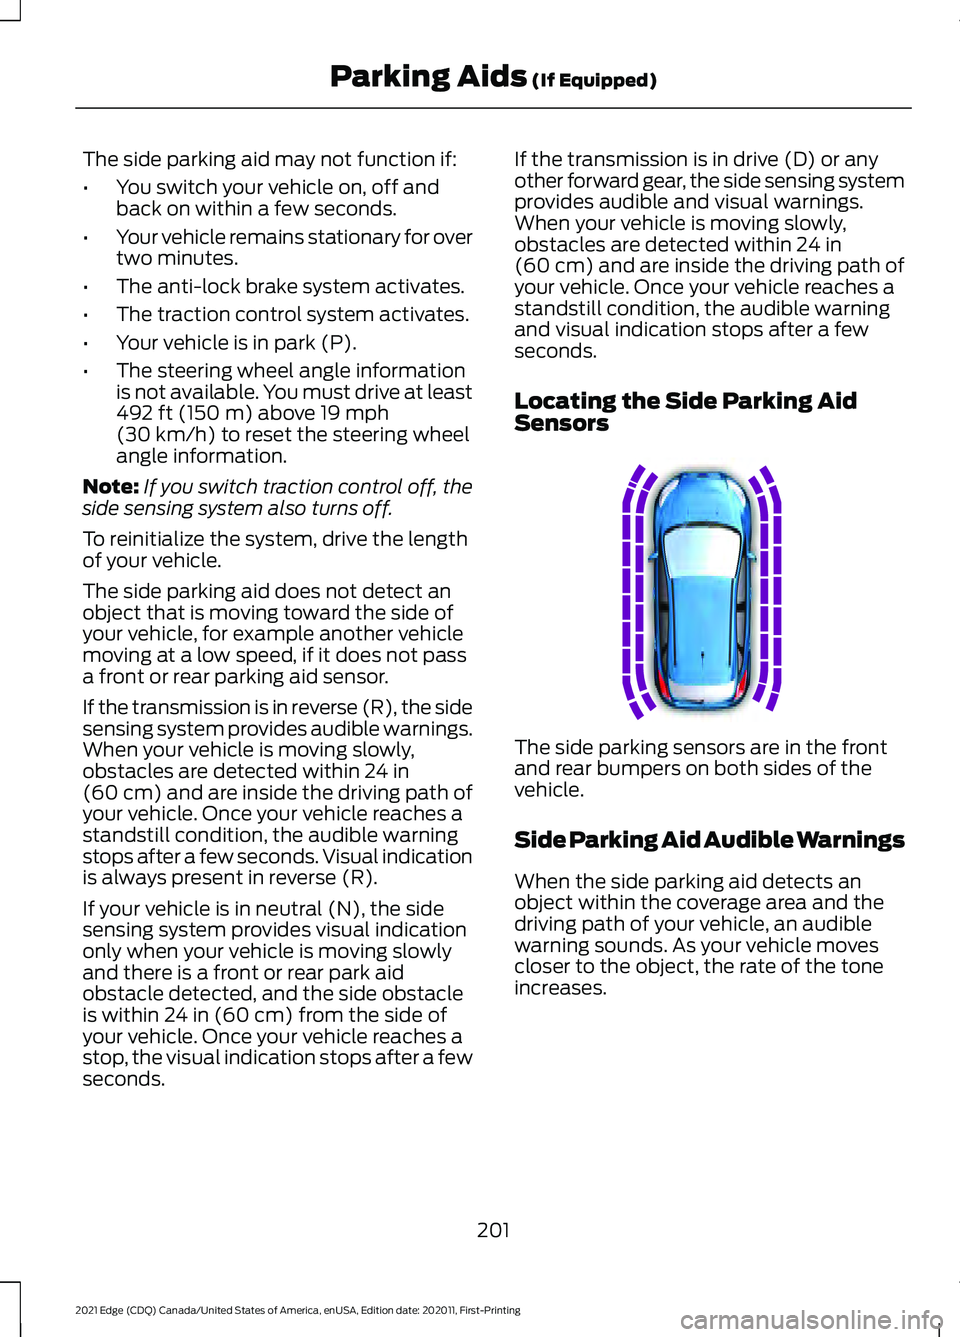 FORD EDGE 2021  Owners Manual The side parking aid may not function if:
•
You switch your vehicle on, off and
back on within a few seconds.
• Your vehicle remains stationary for over
two minutes.
• The anti-lock brake system